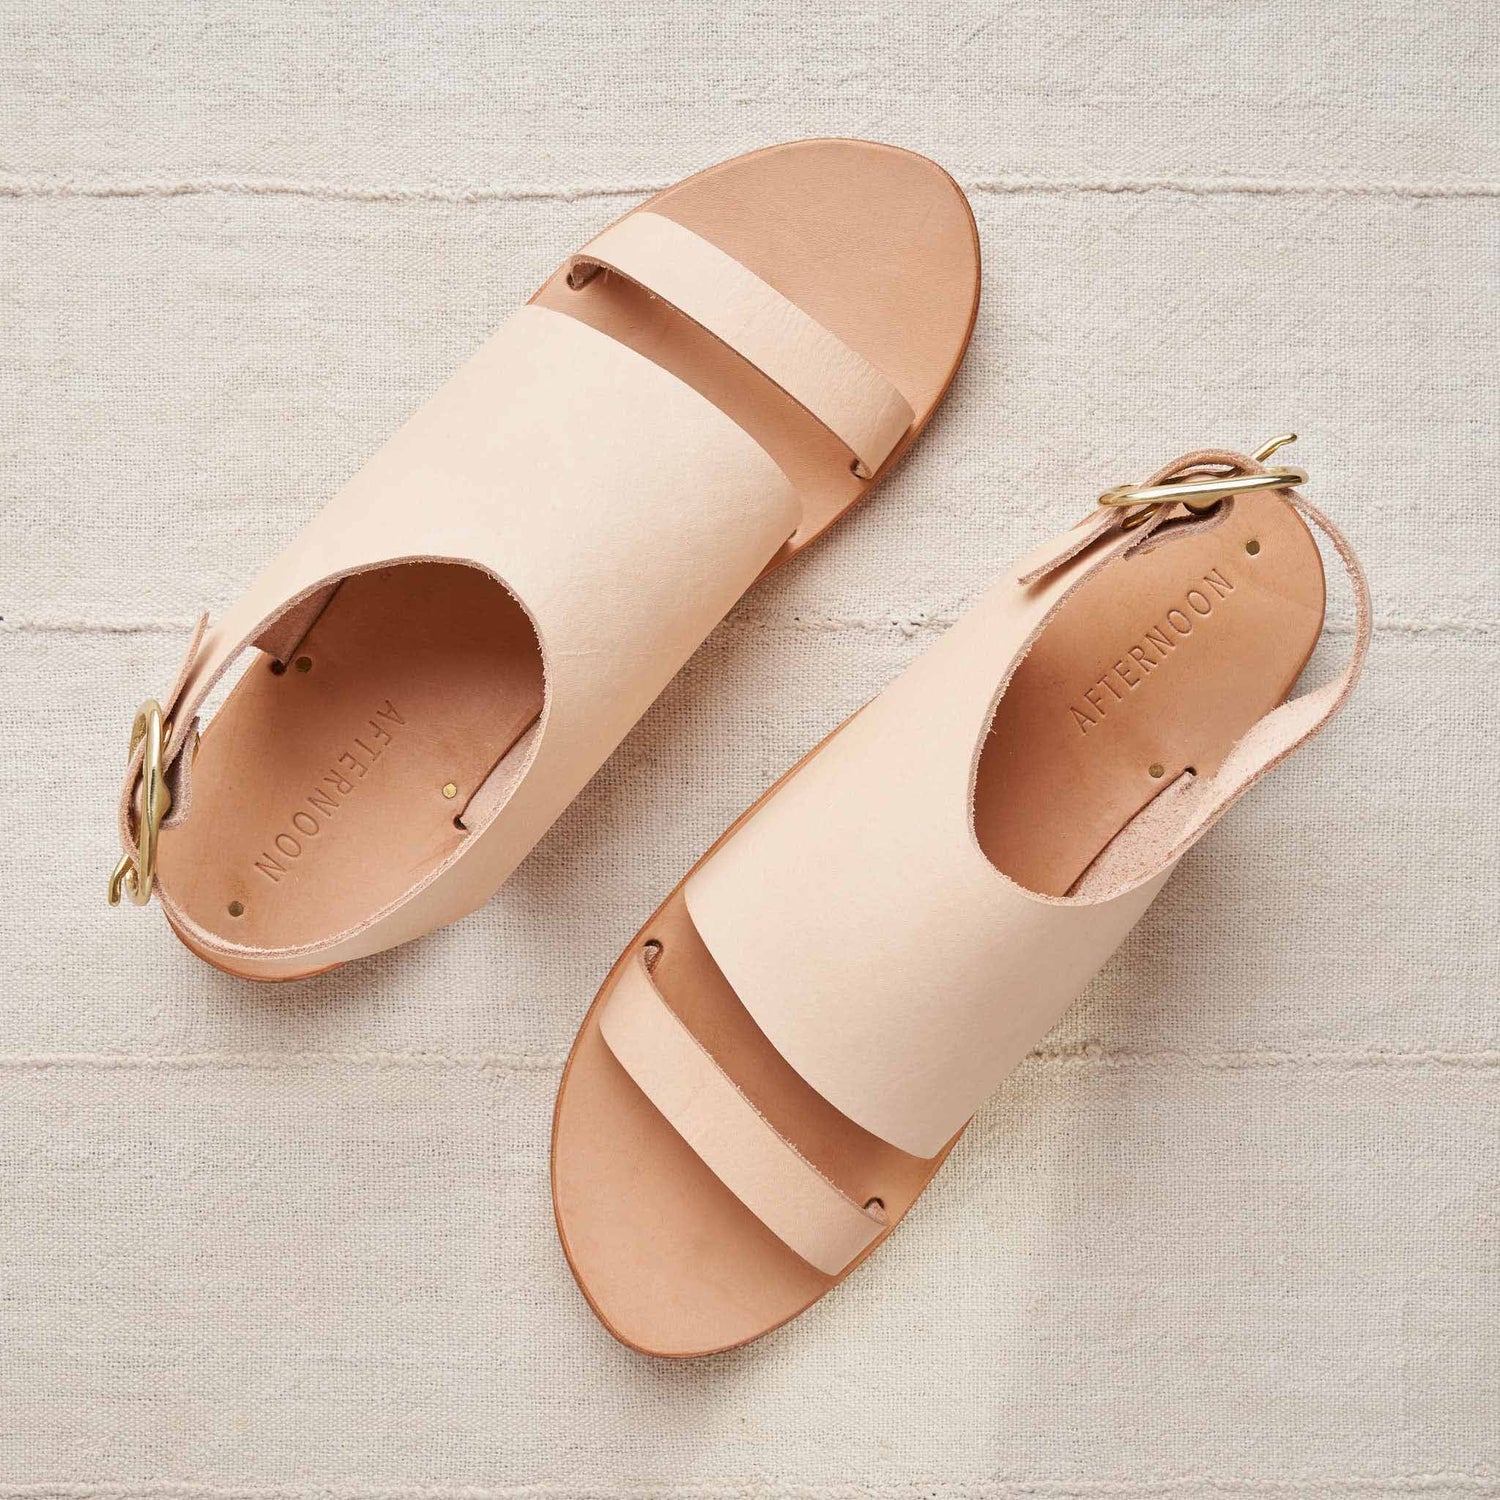 Canyon Sandal, Natural Vegetable Tanned Leather